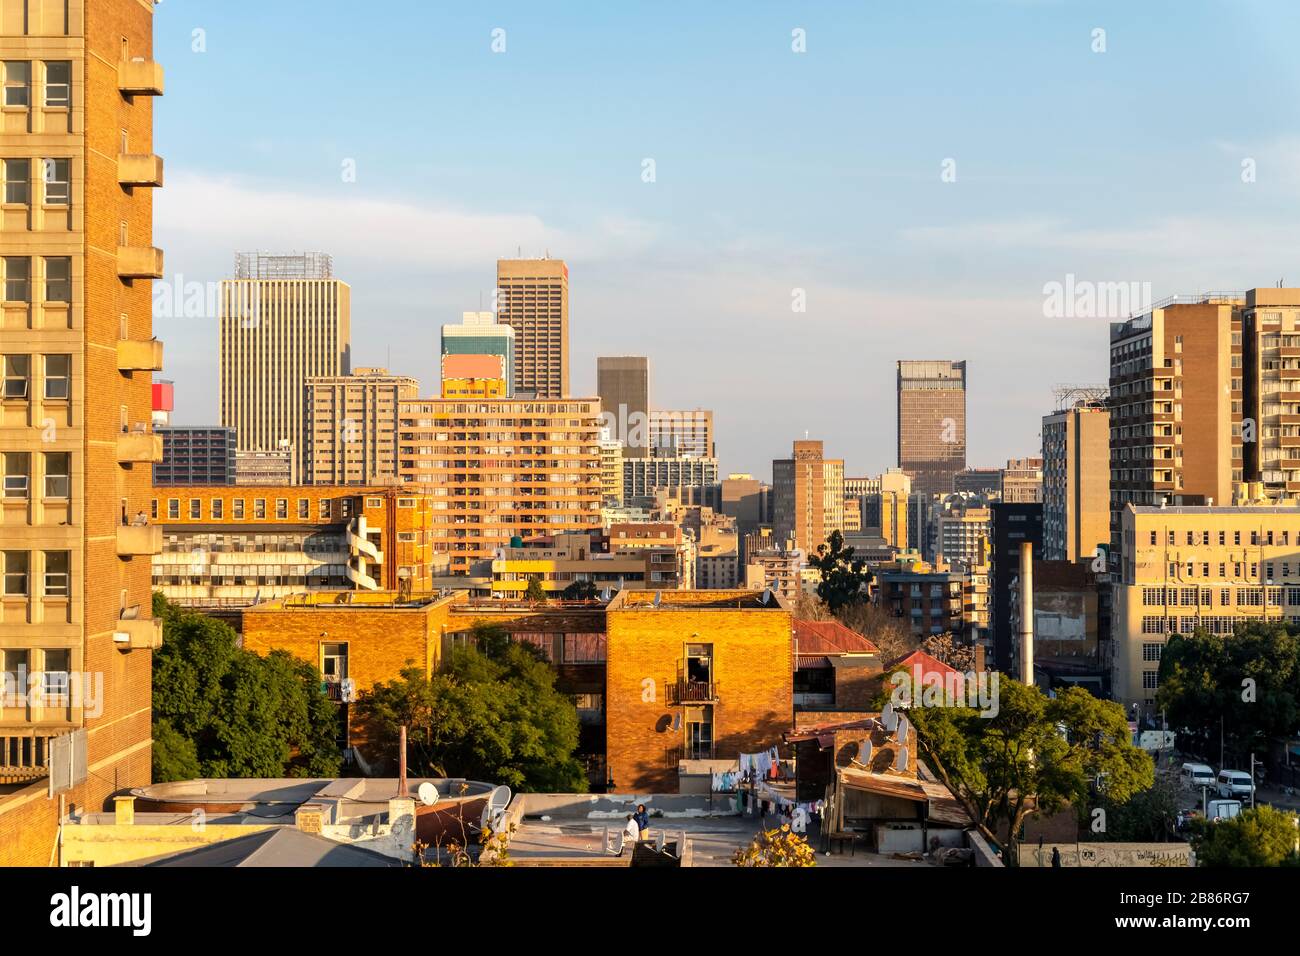 Architecture of Hillbrow, famous part of Johannesburg, South Africa Stock Photo